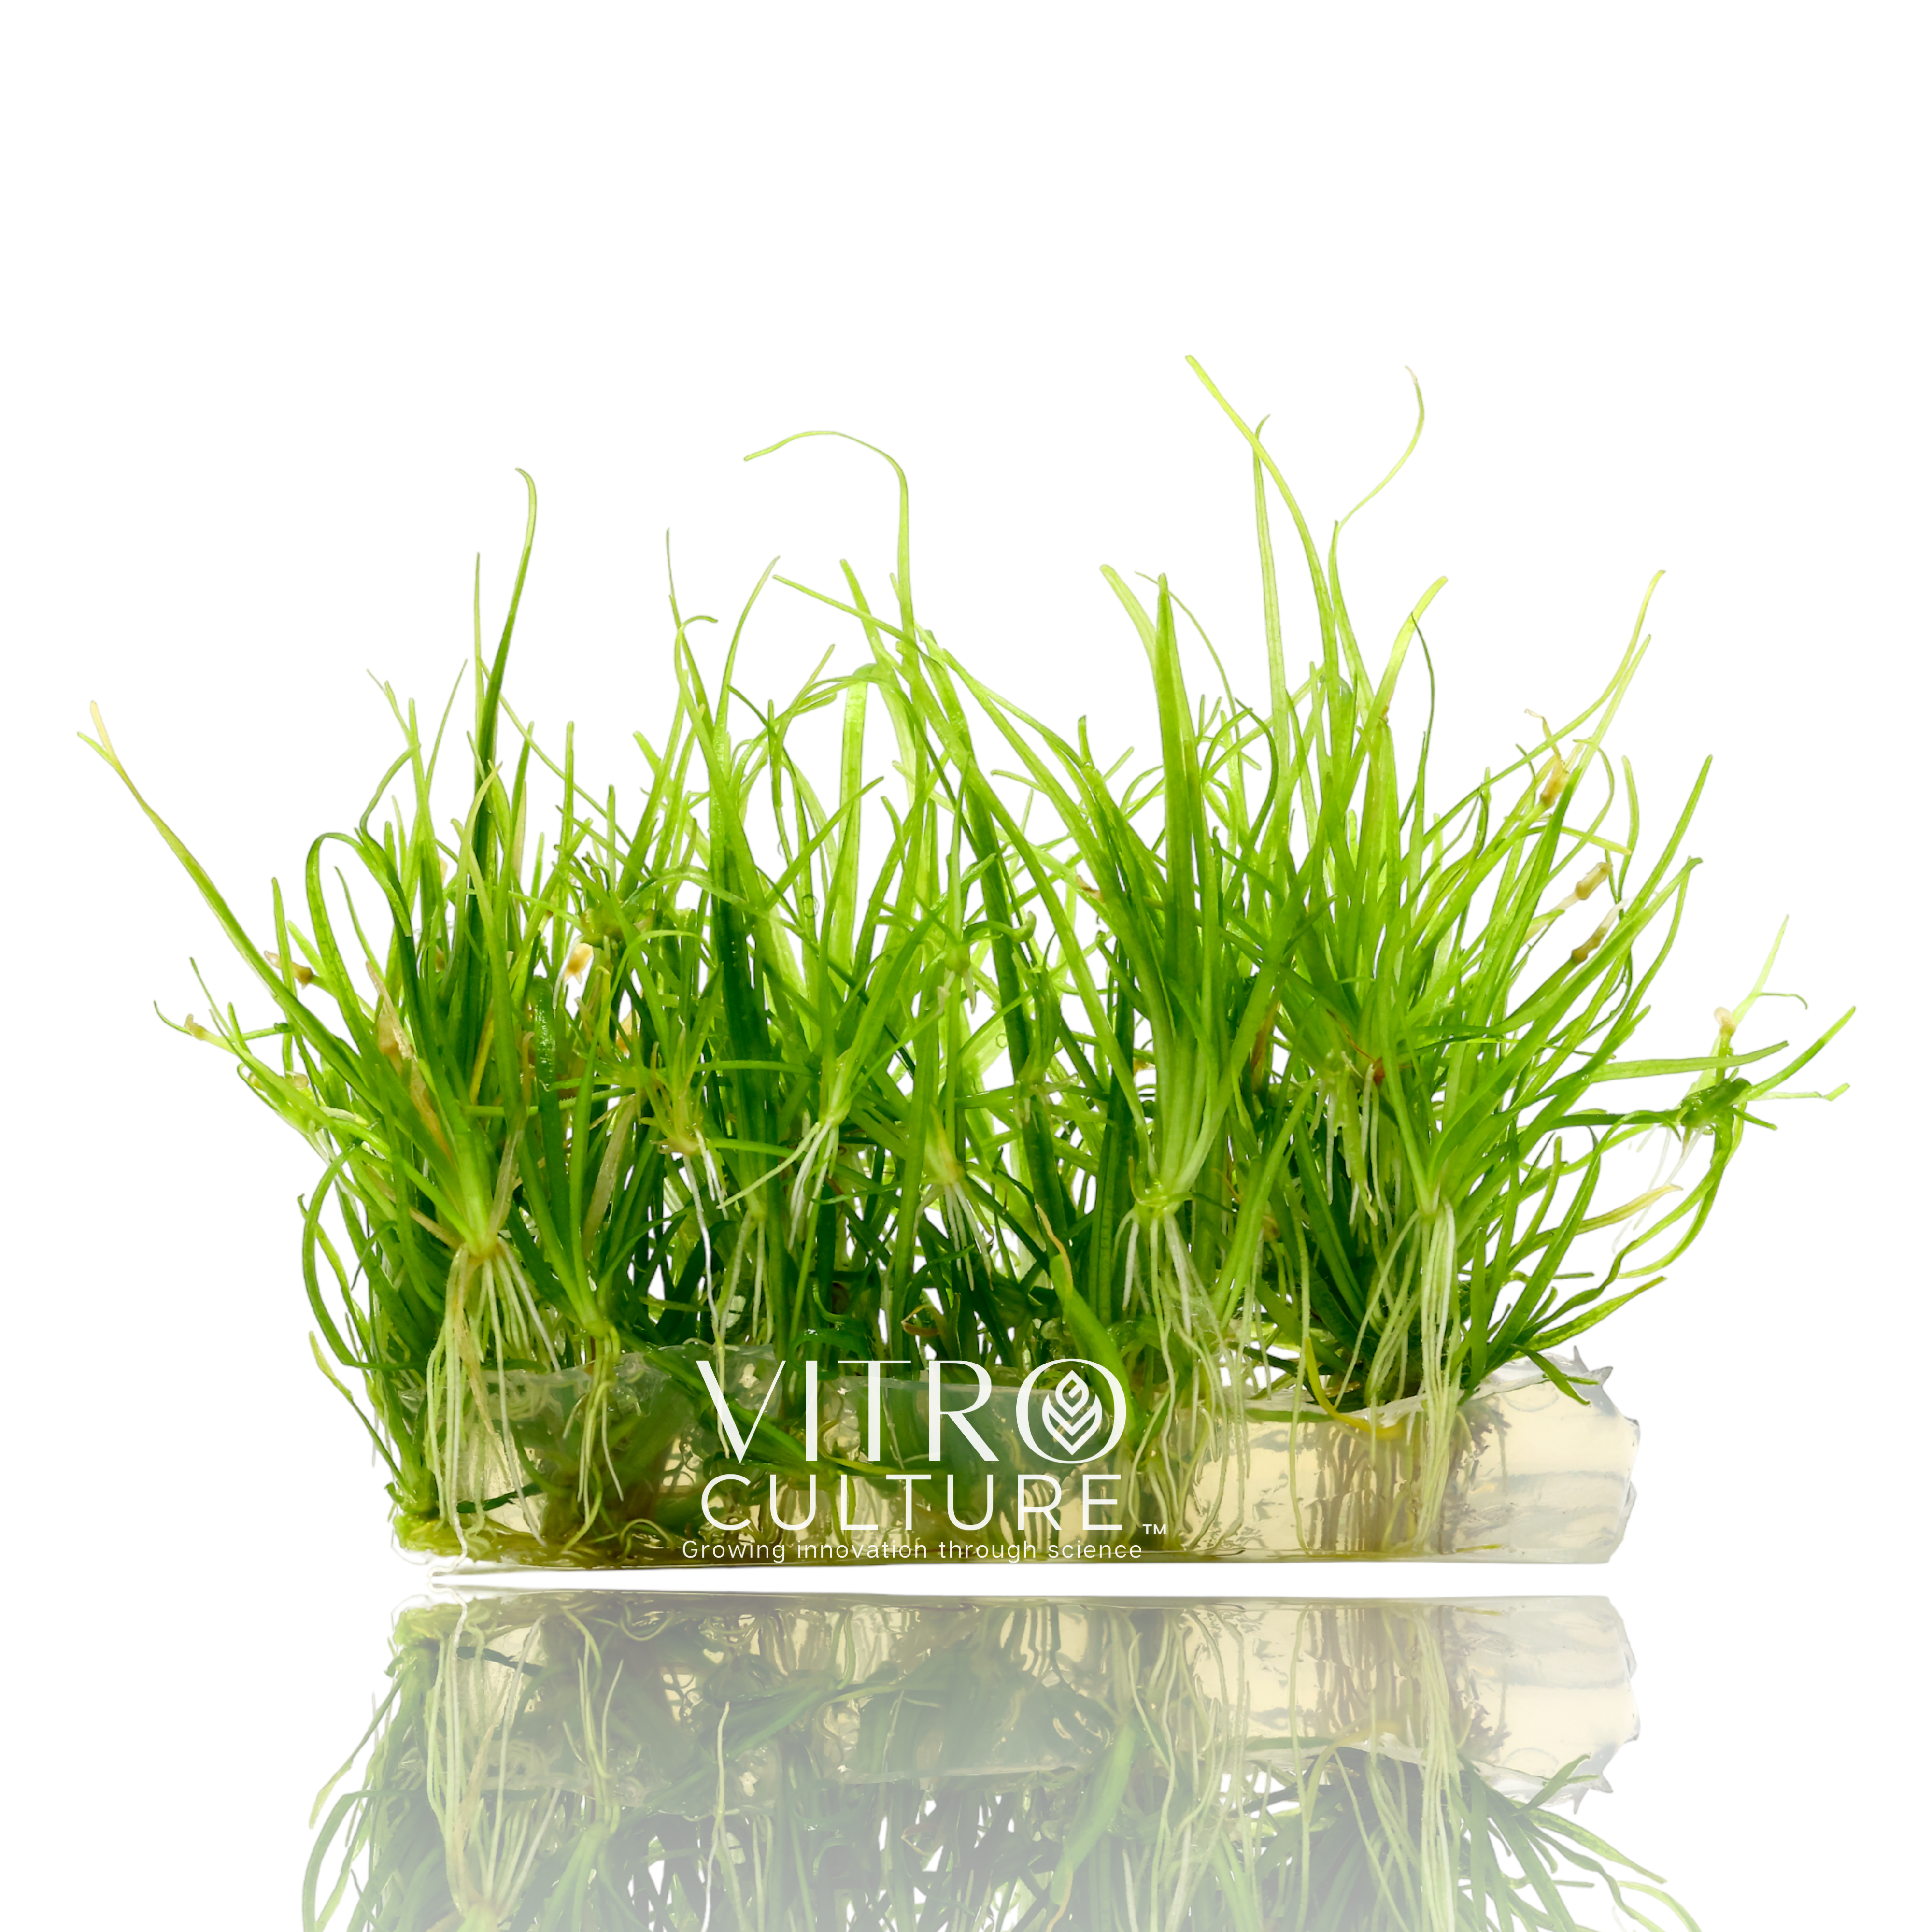 Helanthium tenellum is a small aquatic plant commonly known as Pygmy Chain Sword. It is a popular aquarium plant that is known for its grass-like appearance and ease of care.